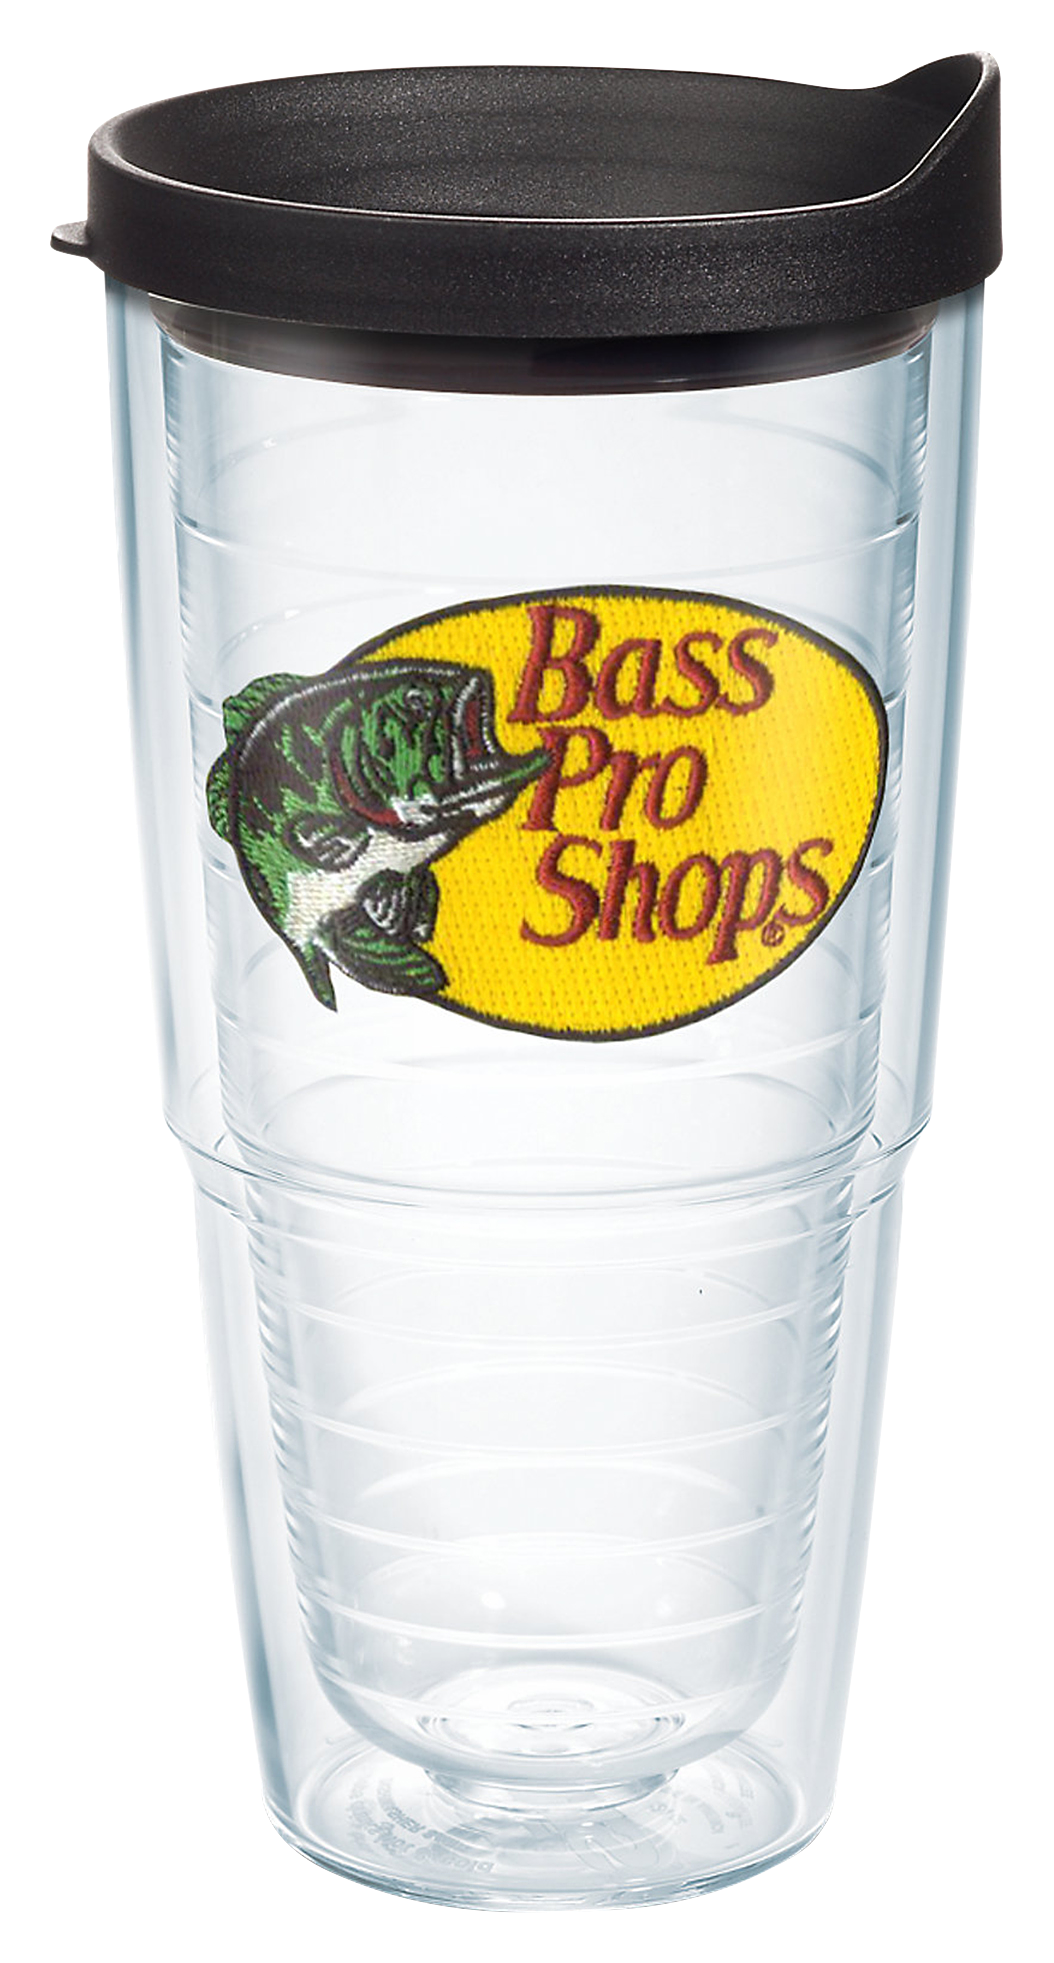 BASS PRO SHOP St. Louis Mug Whirley Tumbler Cup Fish Coffee Thermos 32 Oz